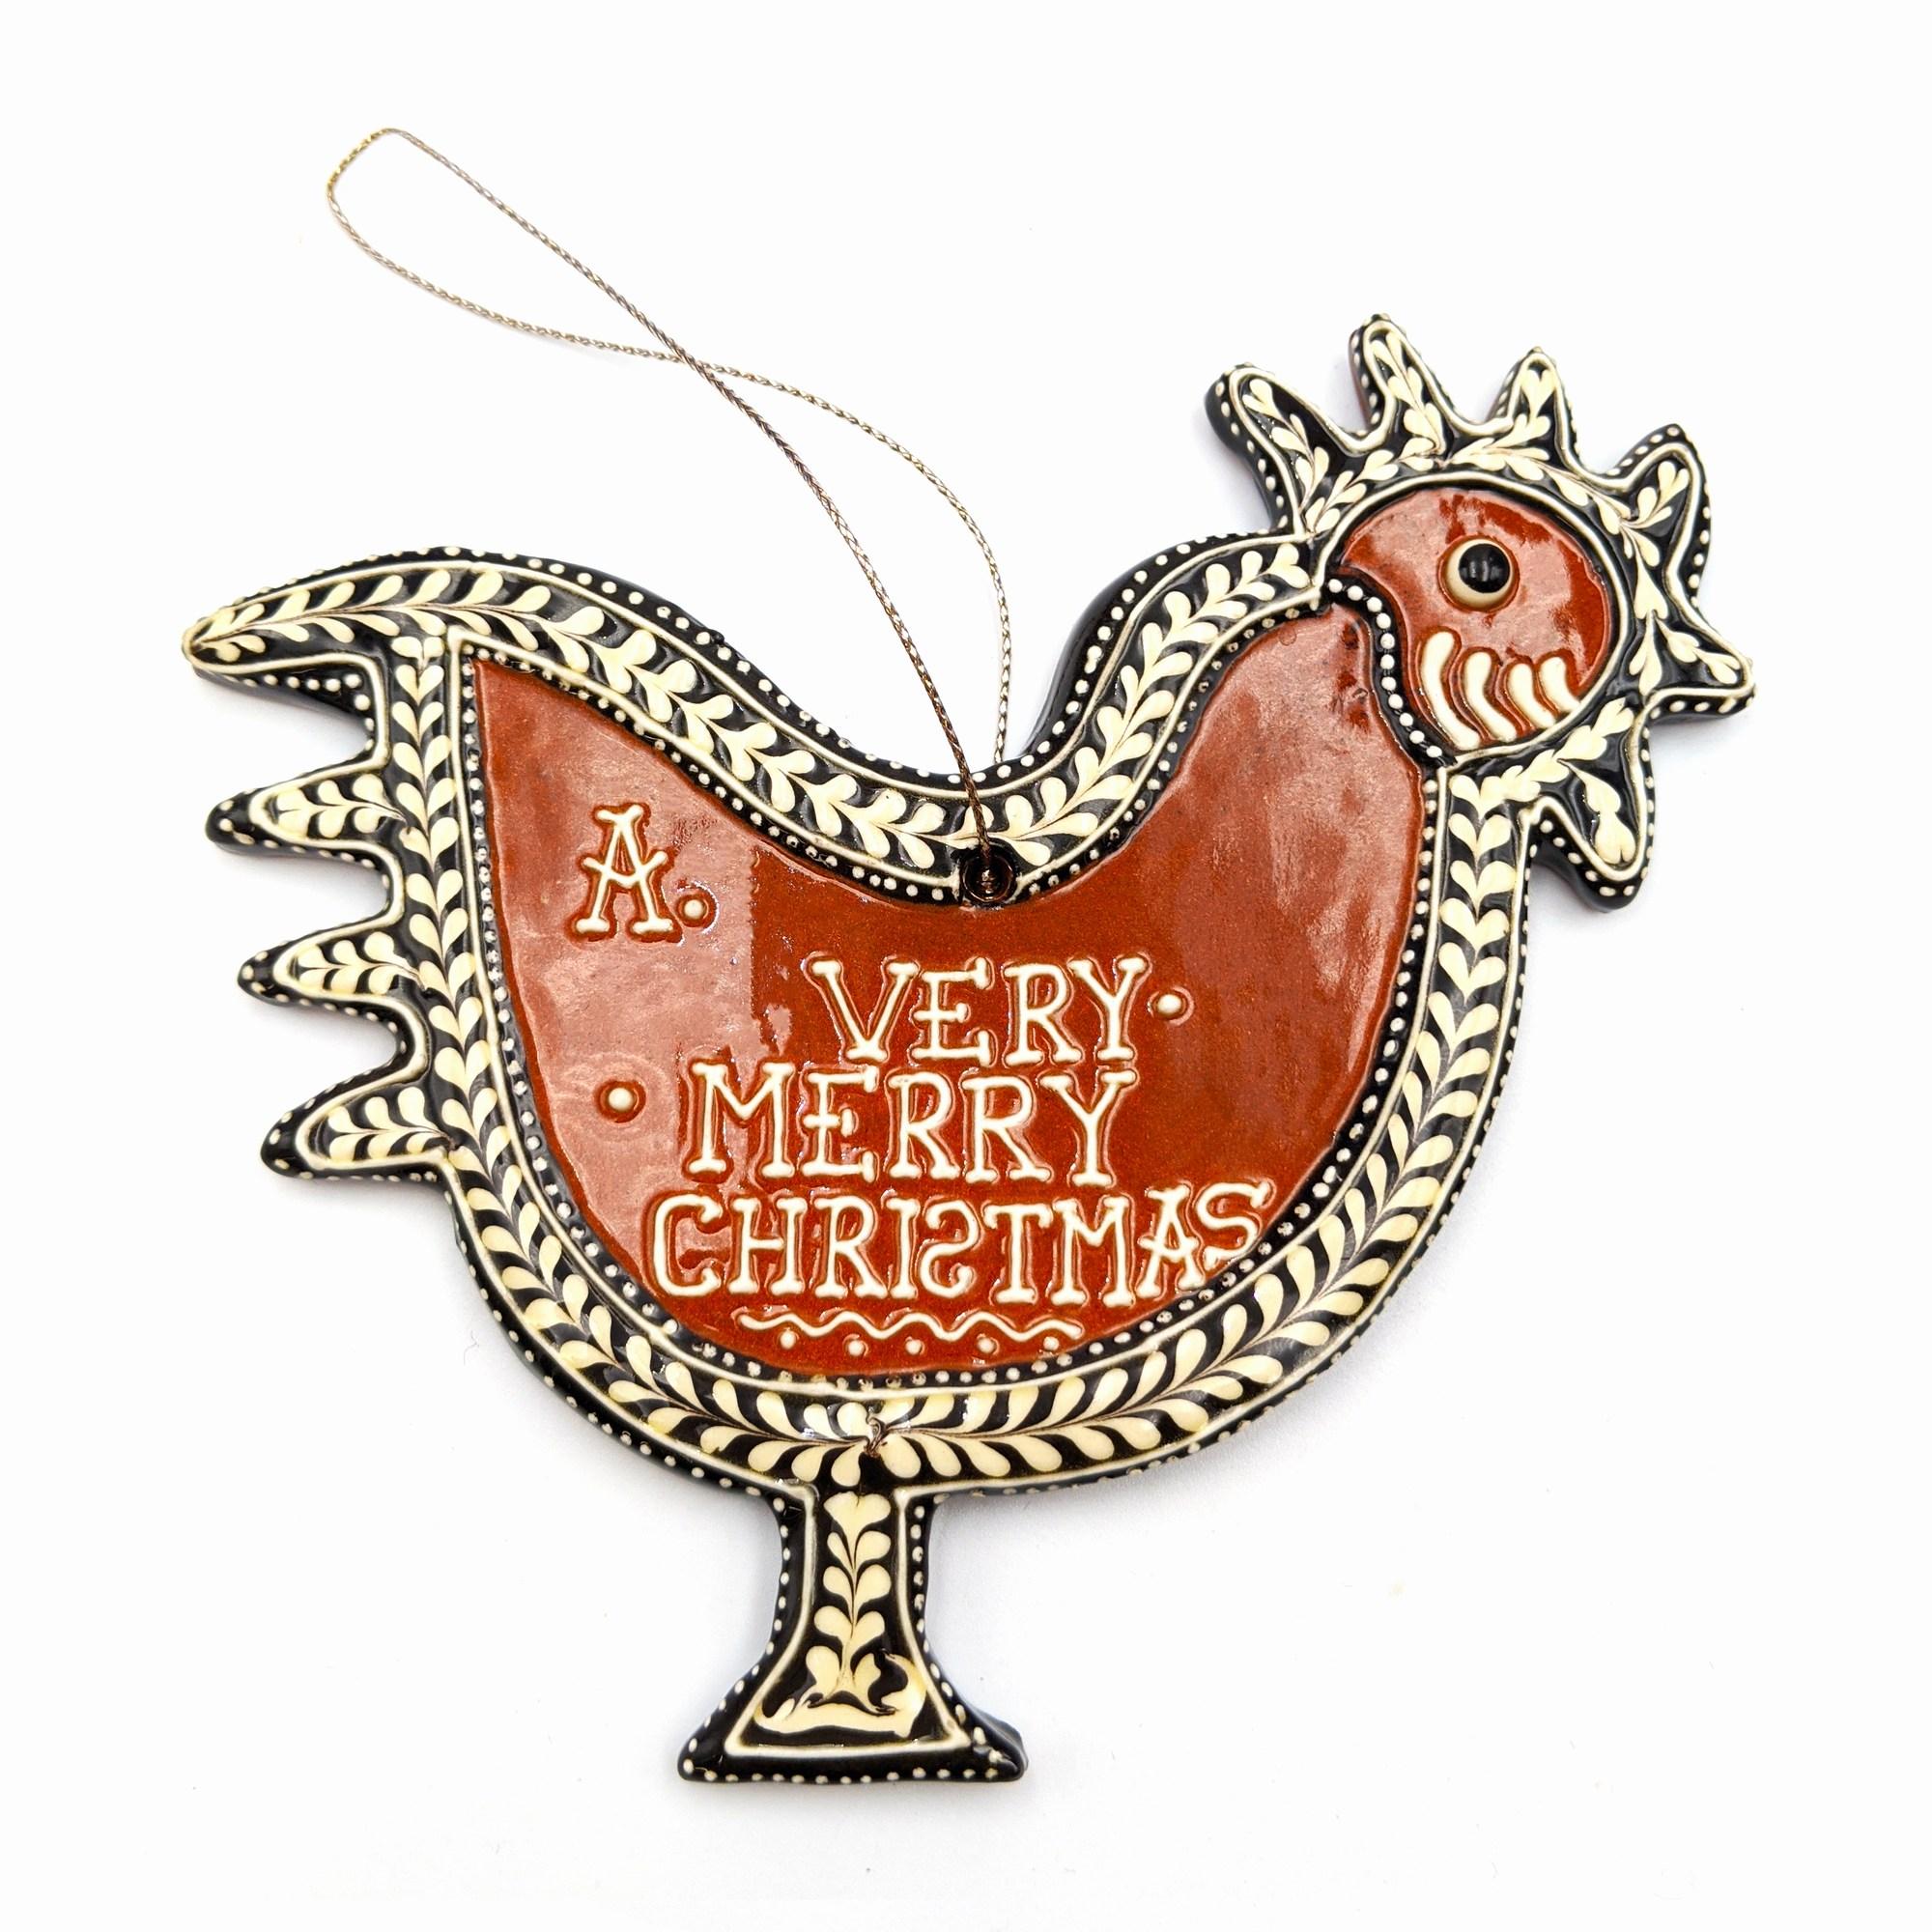 Rooster - A Very Merry Christmas - Sculpture by Irma Starr